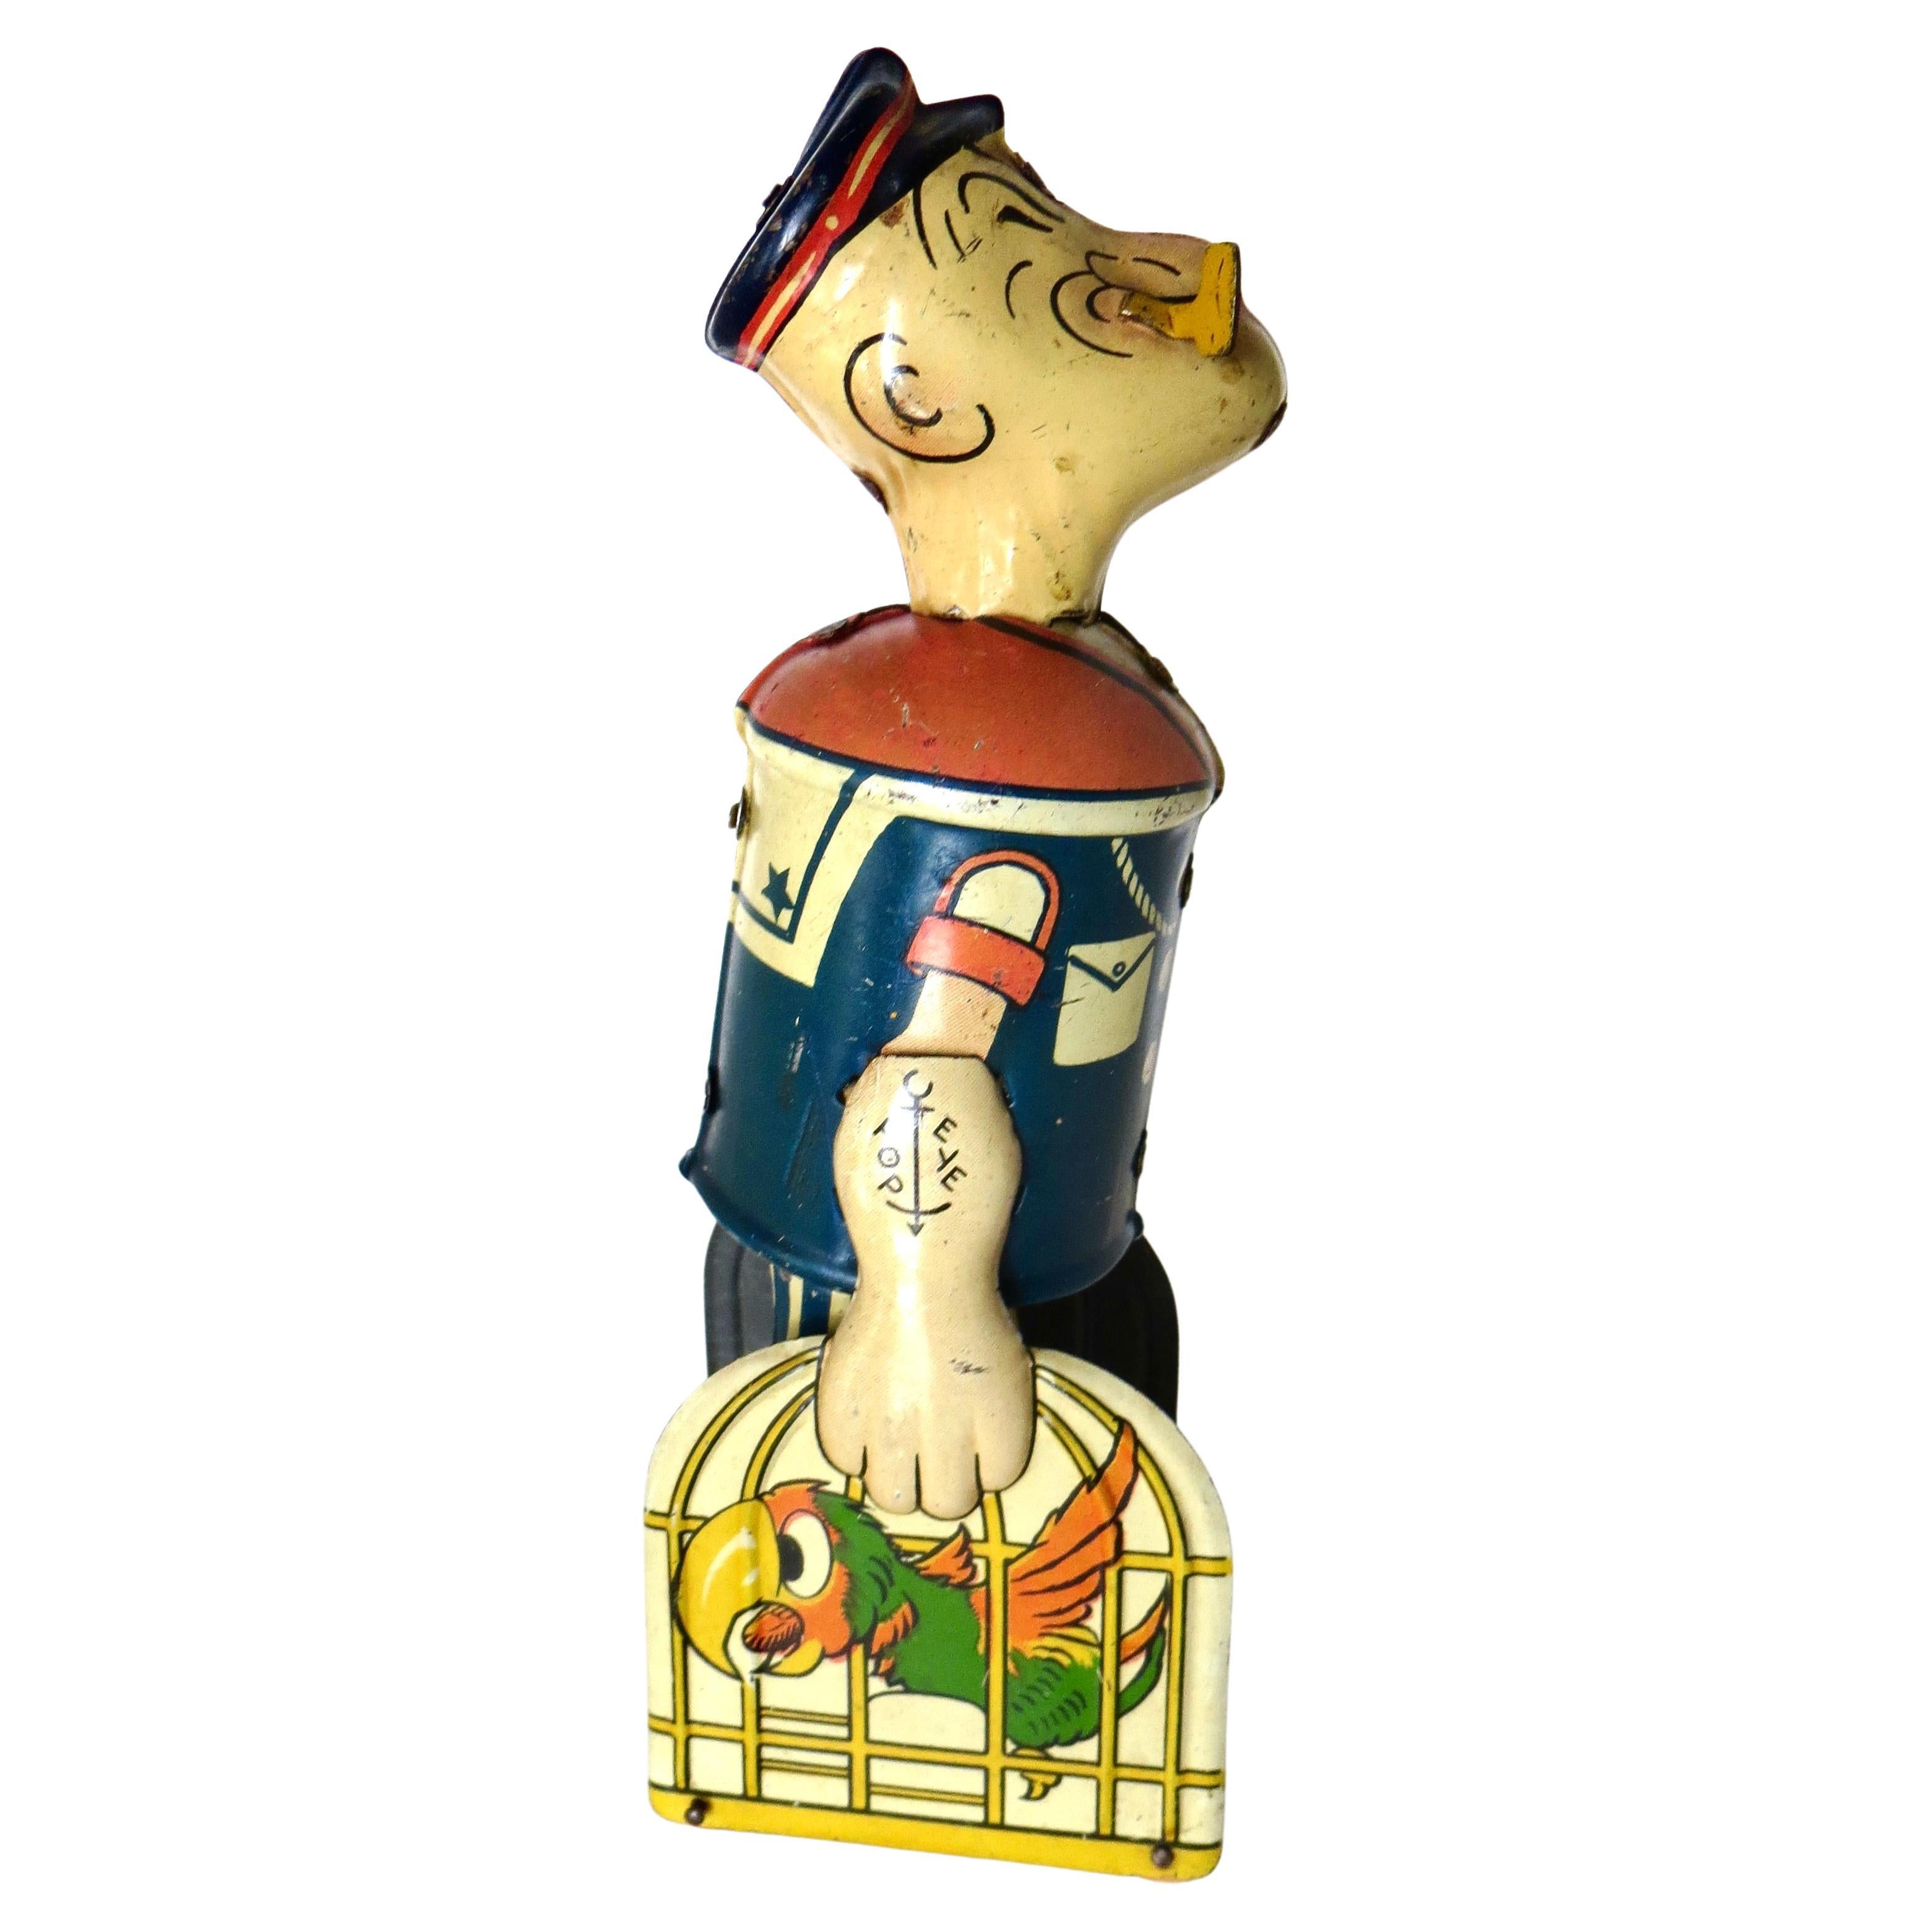 "Walking Popeye" With Parrots Vintage Windup Toy by Marx Toy Co.